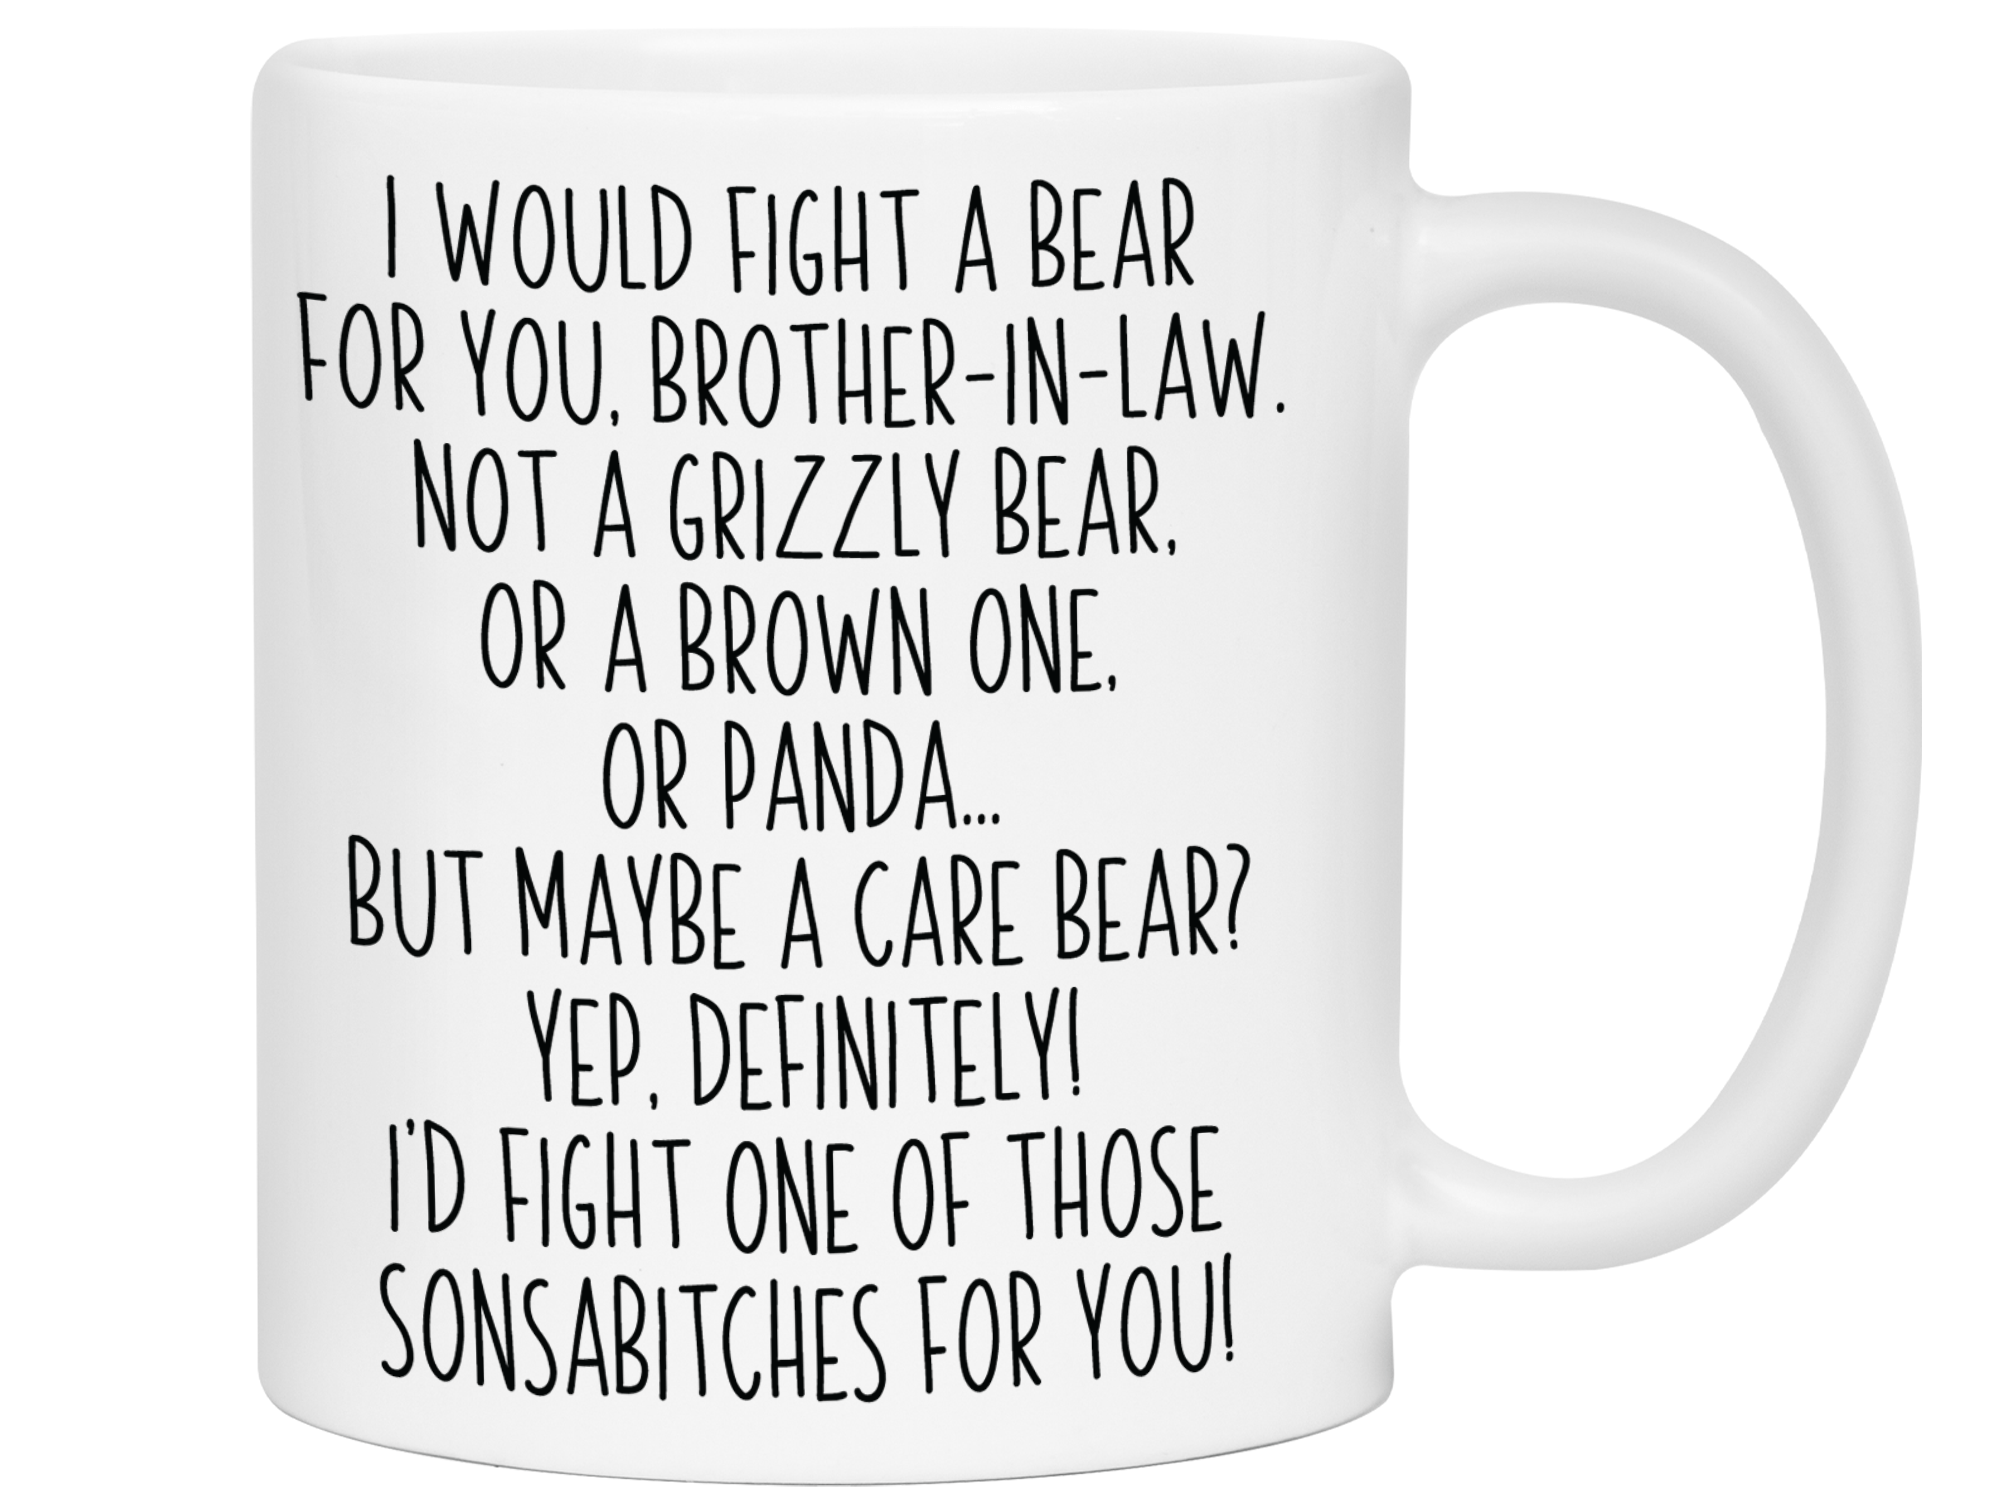 Funny Gifts for Brothers-in-law - I Would Fight a Bear for You Brother-in-law Gag Coffee Mug